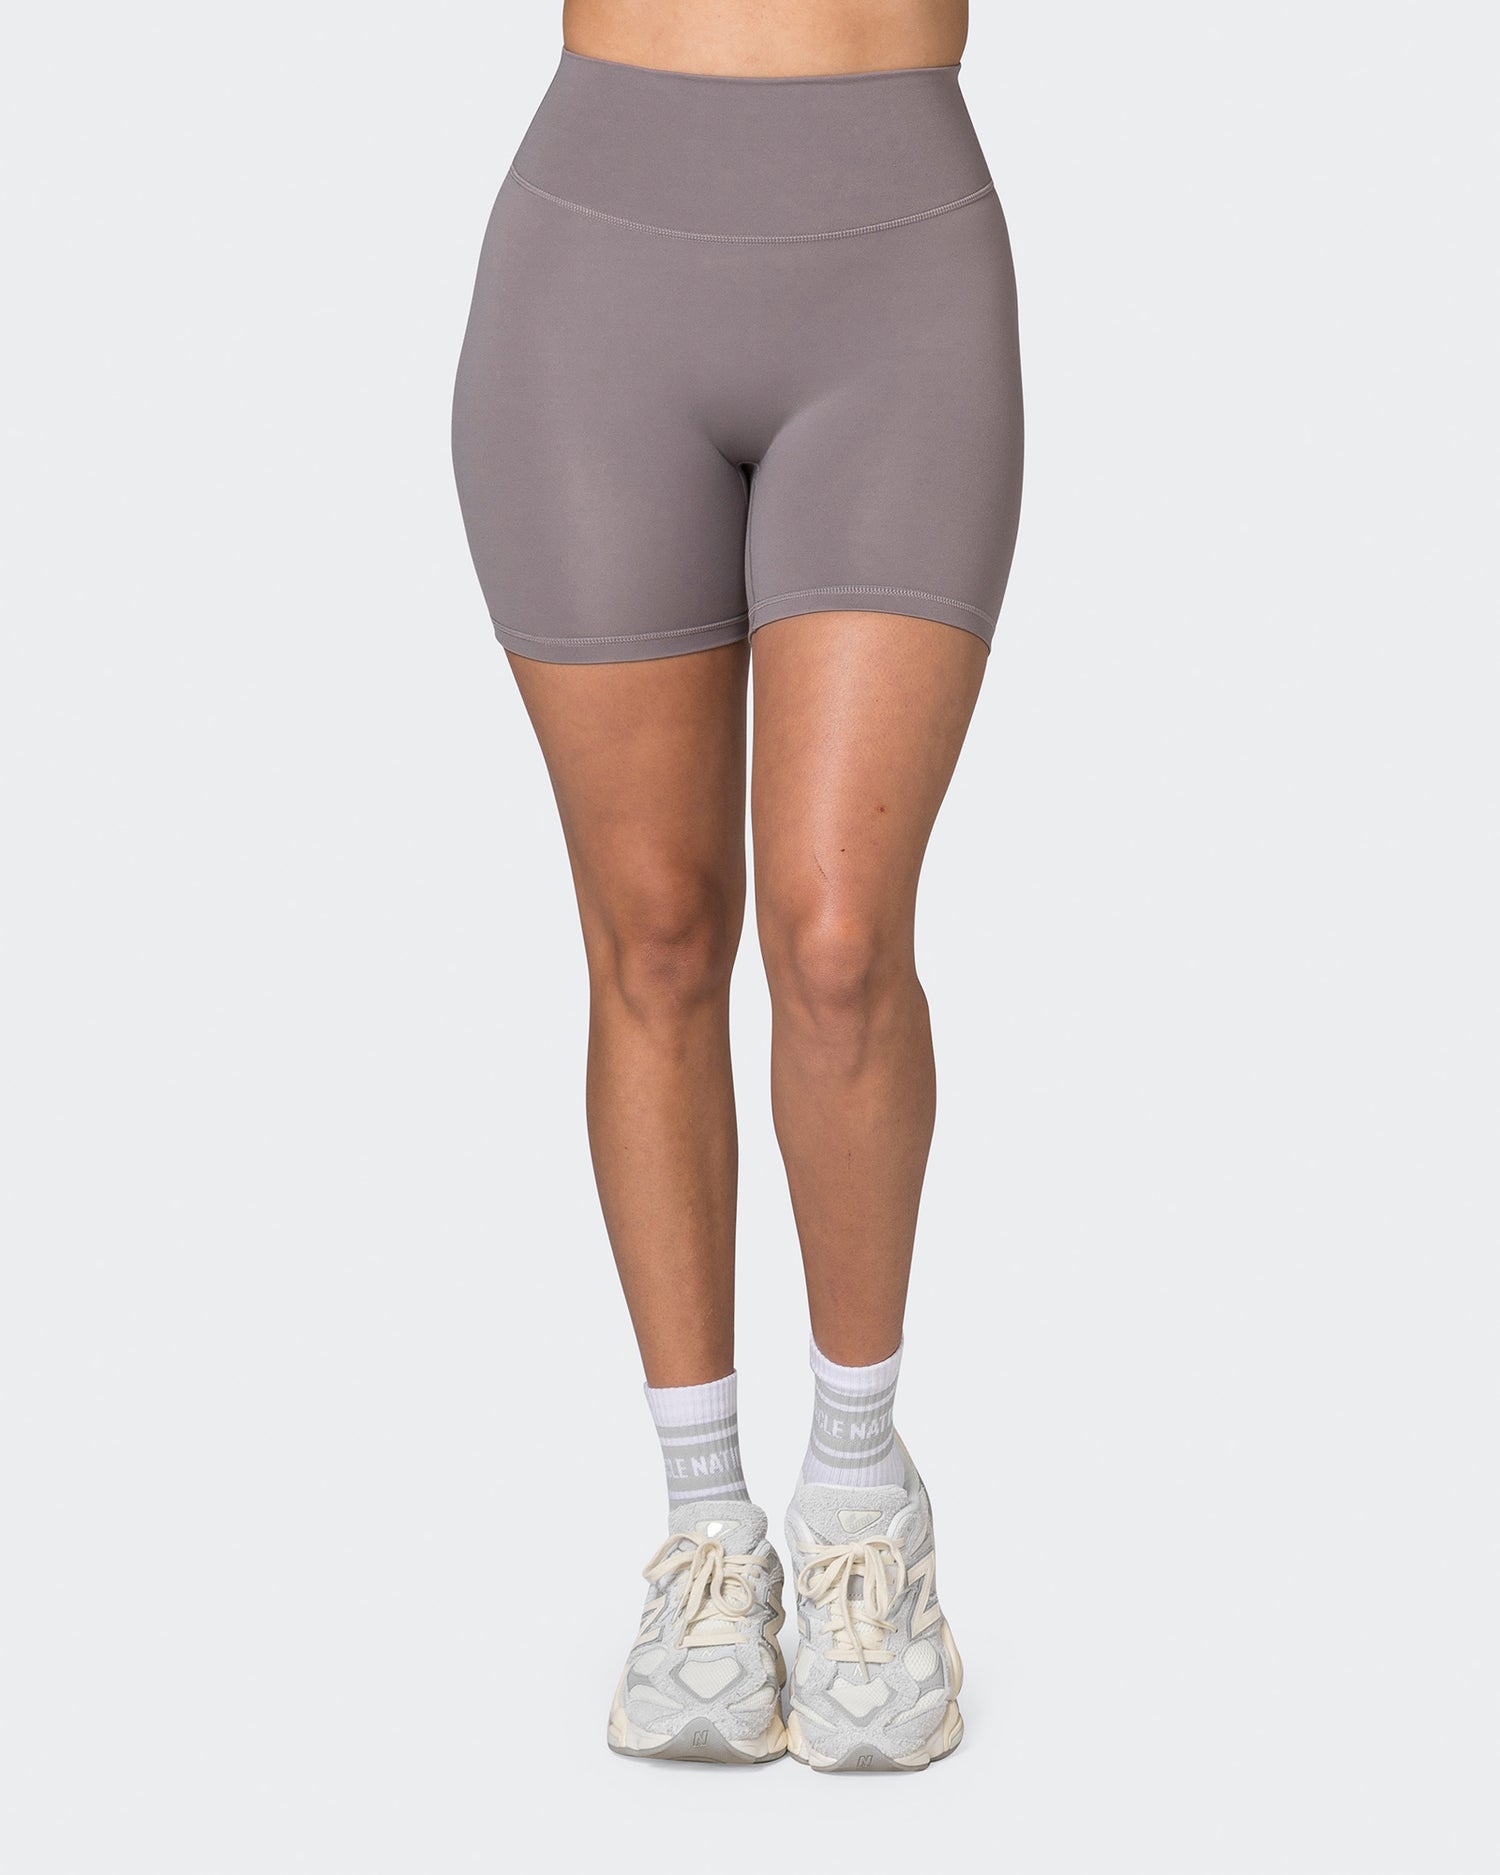 Game Changer Scrunch Midway Shorts - Pearl Grey